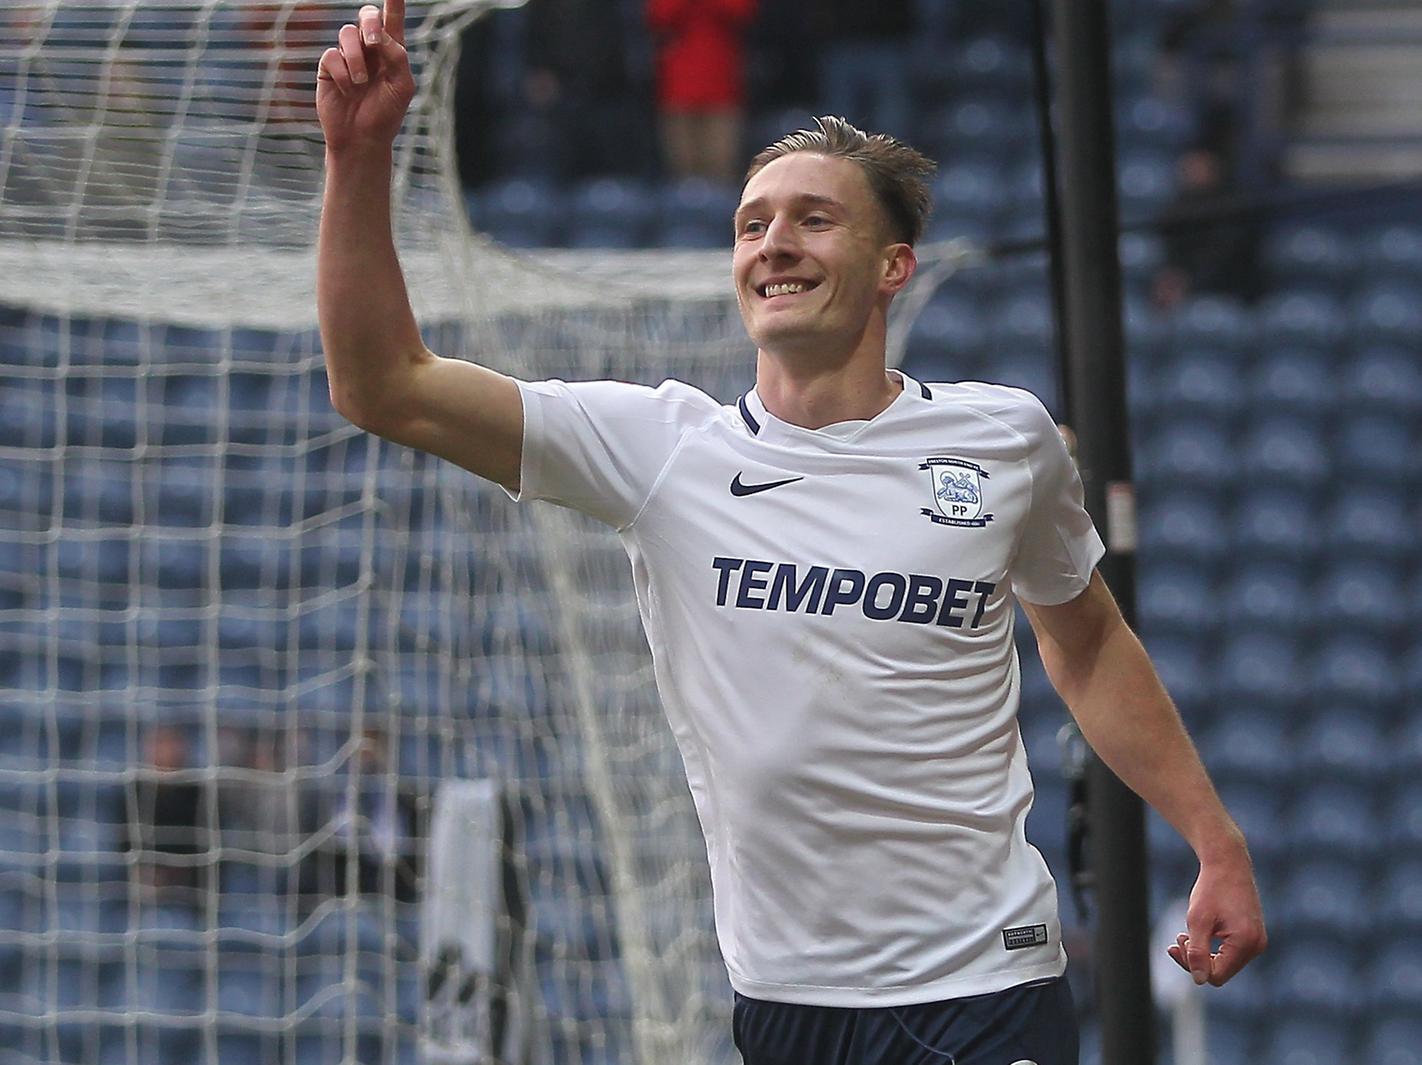 A product of the PNE Academy, Davies is going from strength to strength year on year. Composure and class in abundance, his ability on the ball doesn't sacrifice his ability to have a real battle with strikers.